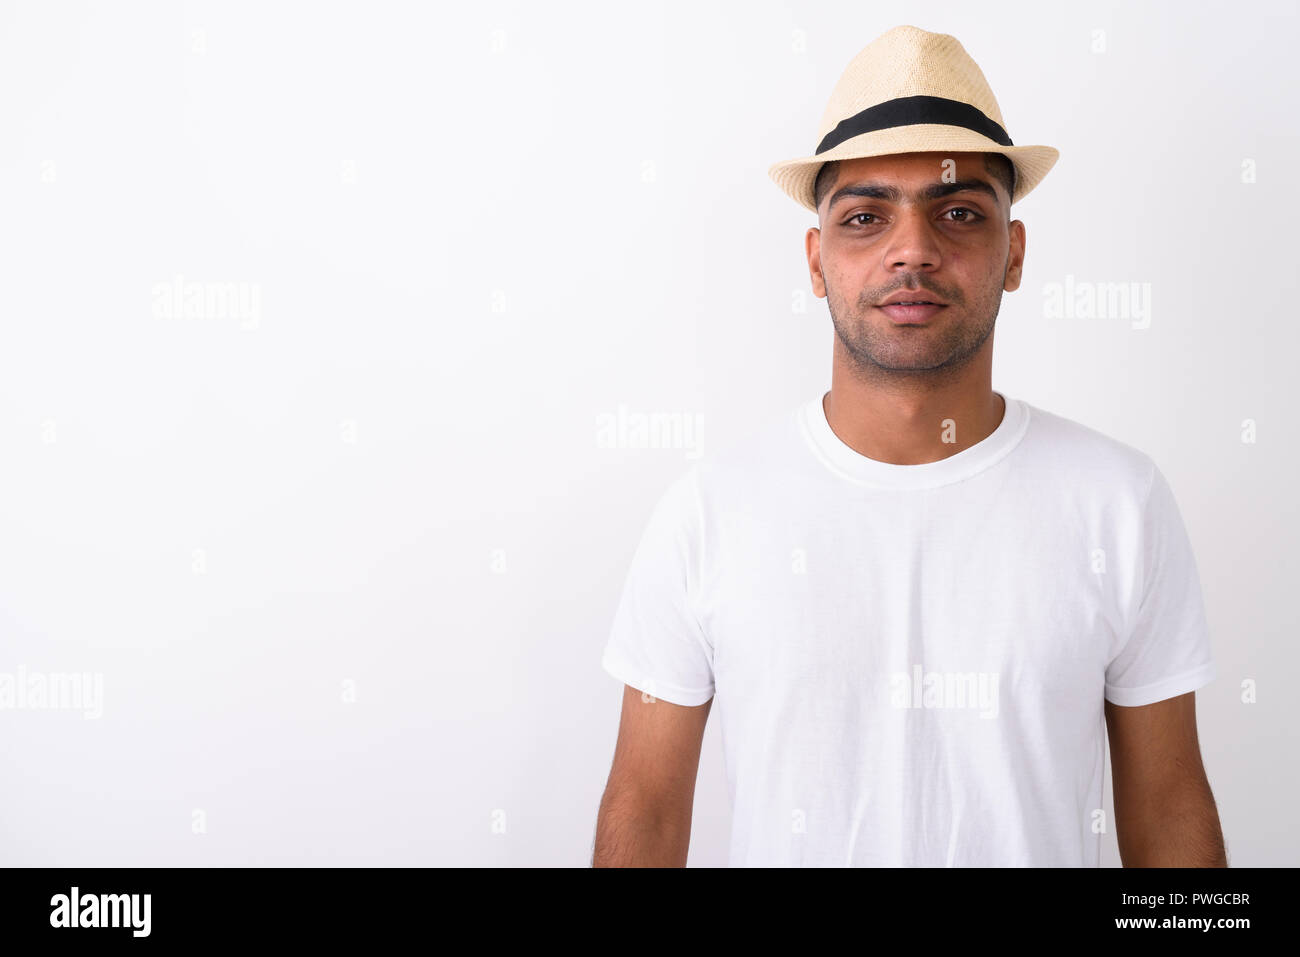 Young Indian tourist man wearing hat against white background Stock Photo